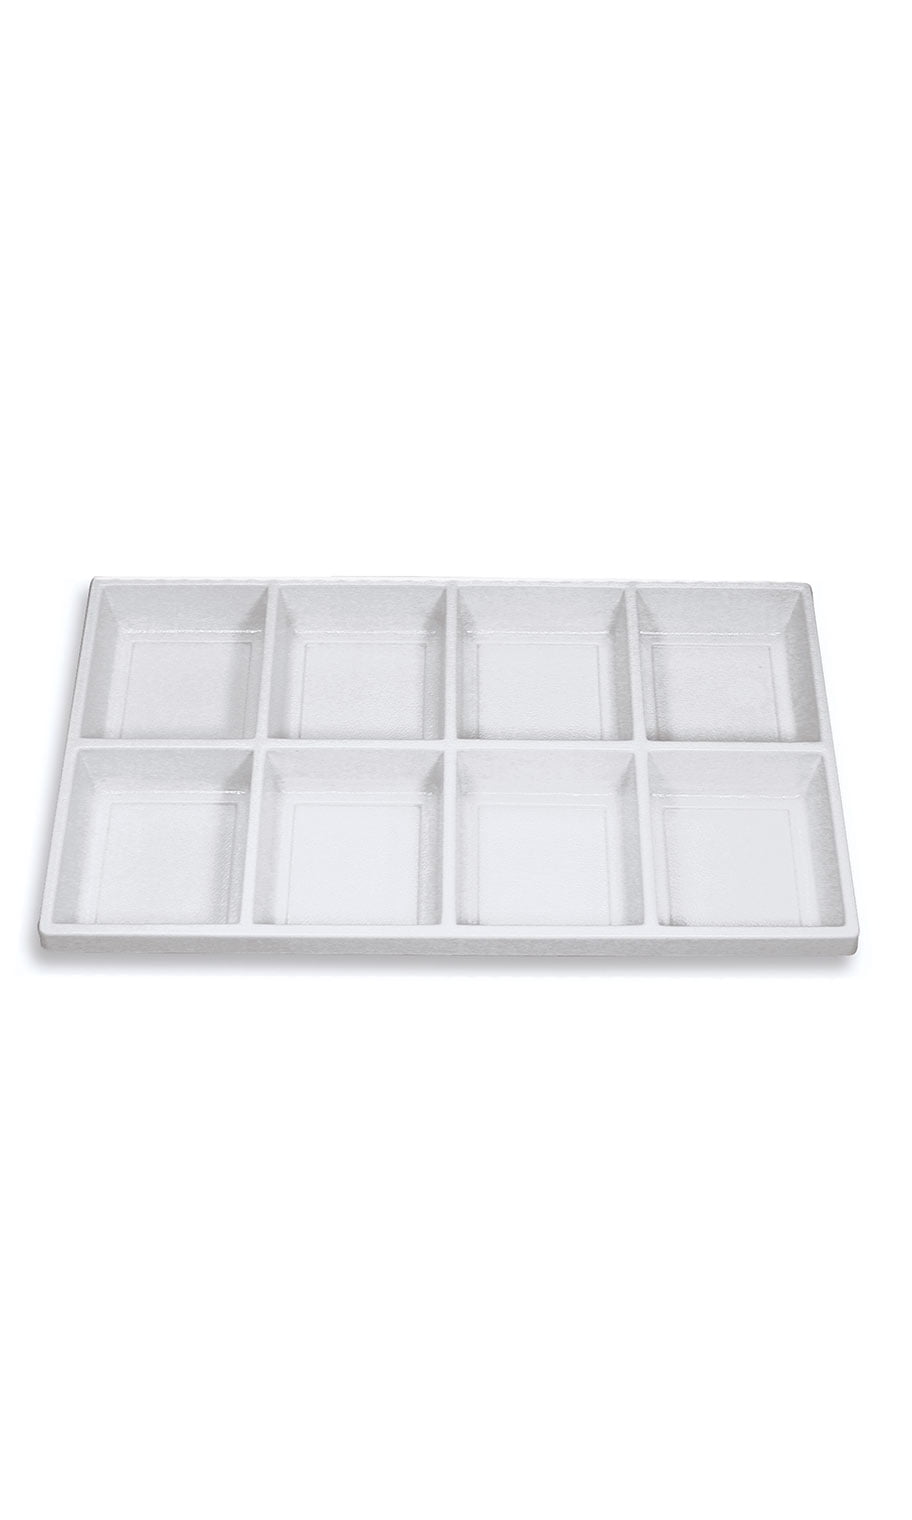 10 Pc Black Flocked Plastic Tray Inserts With 8 Compartments 14 1/4" x 7 1/2" 